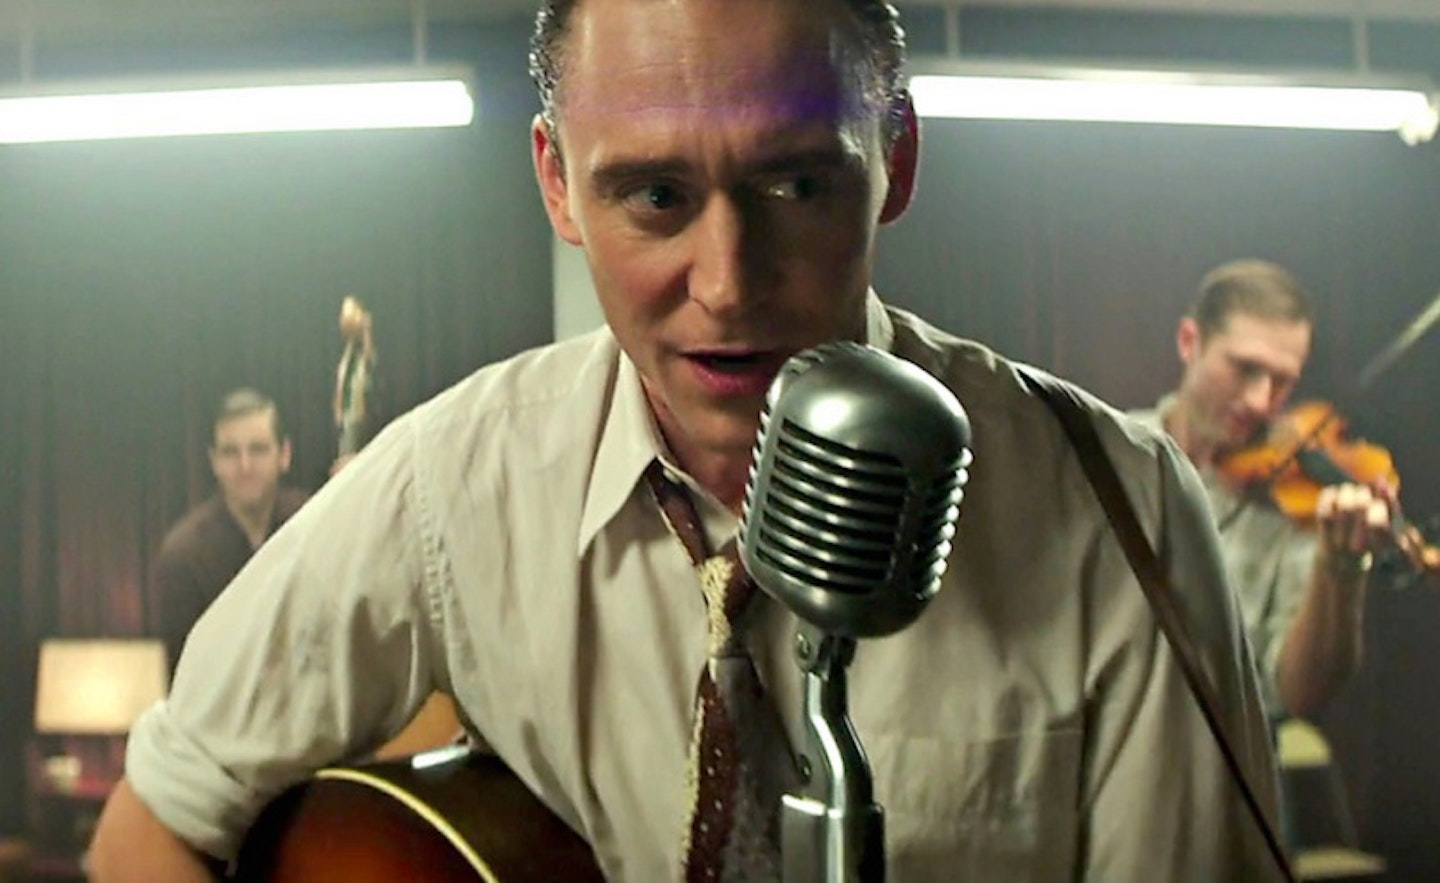 Tom Hiddleston as Hank Williams in I Saw The Light